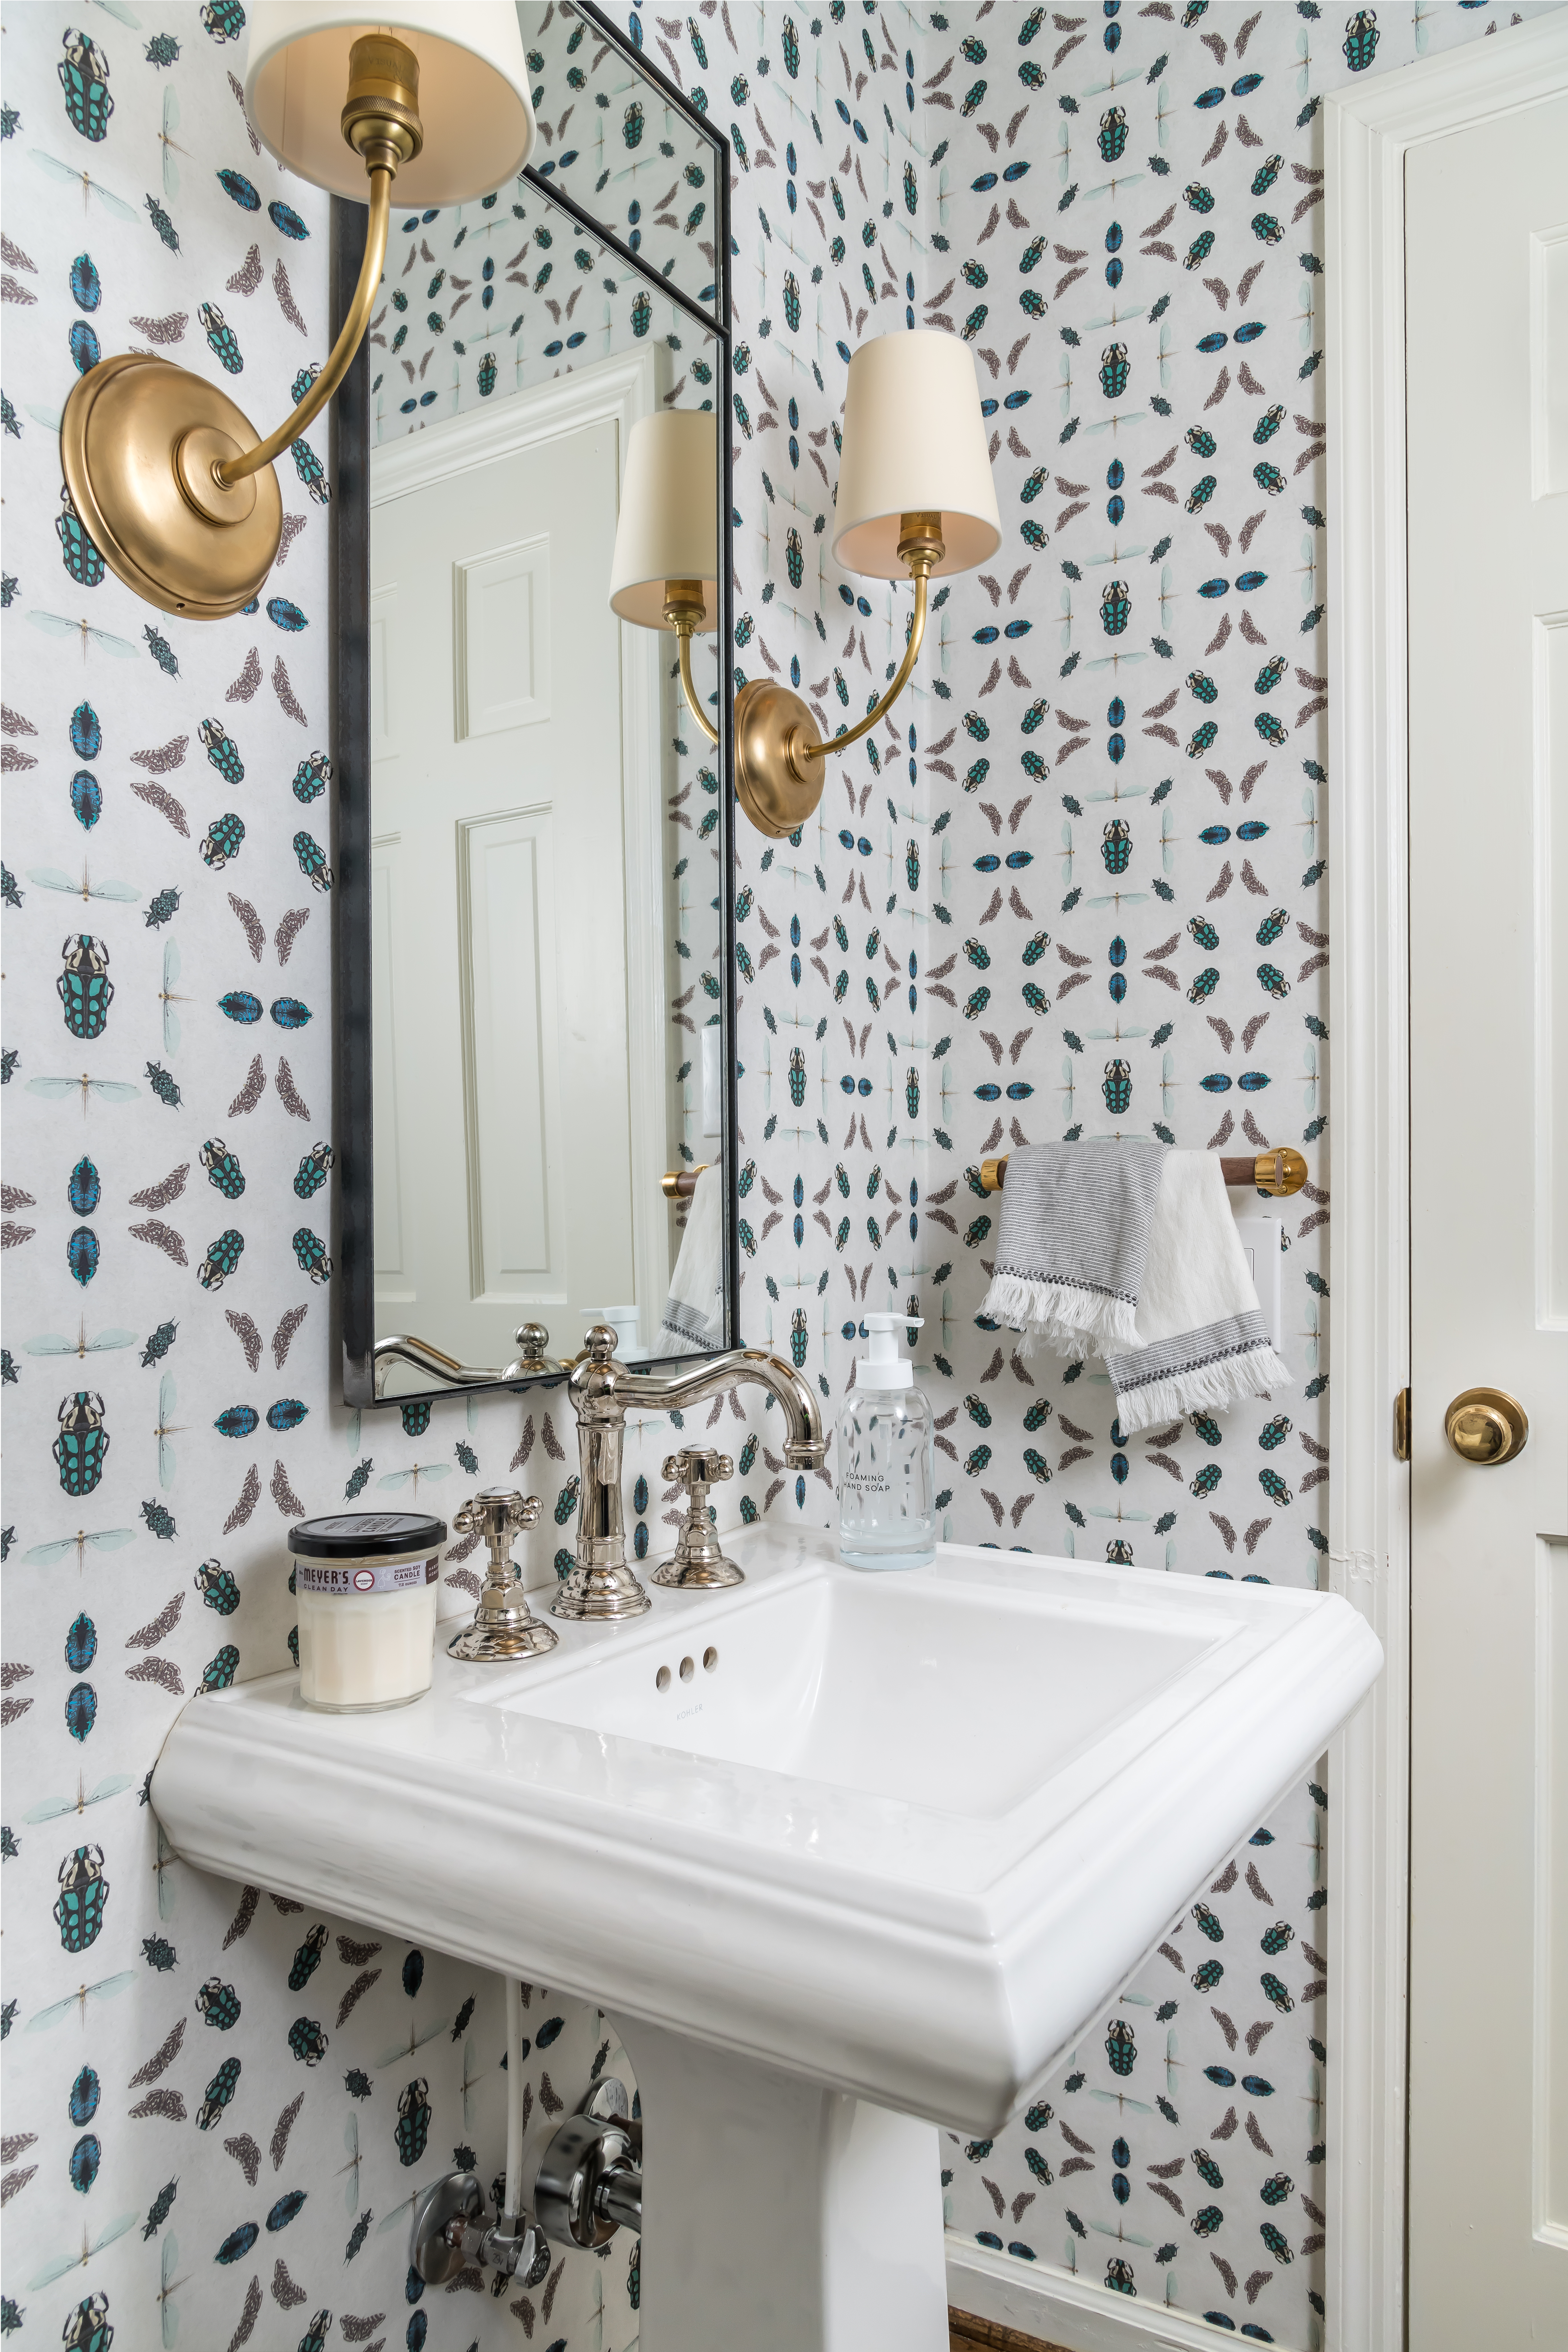 Stylish powder bath with patterned walls and gold hardware